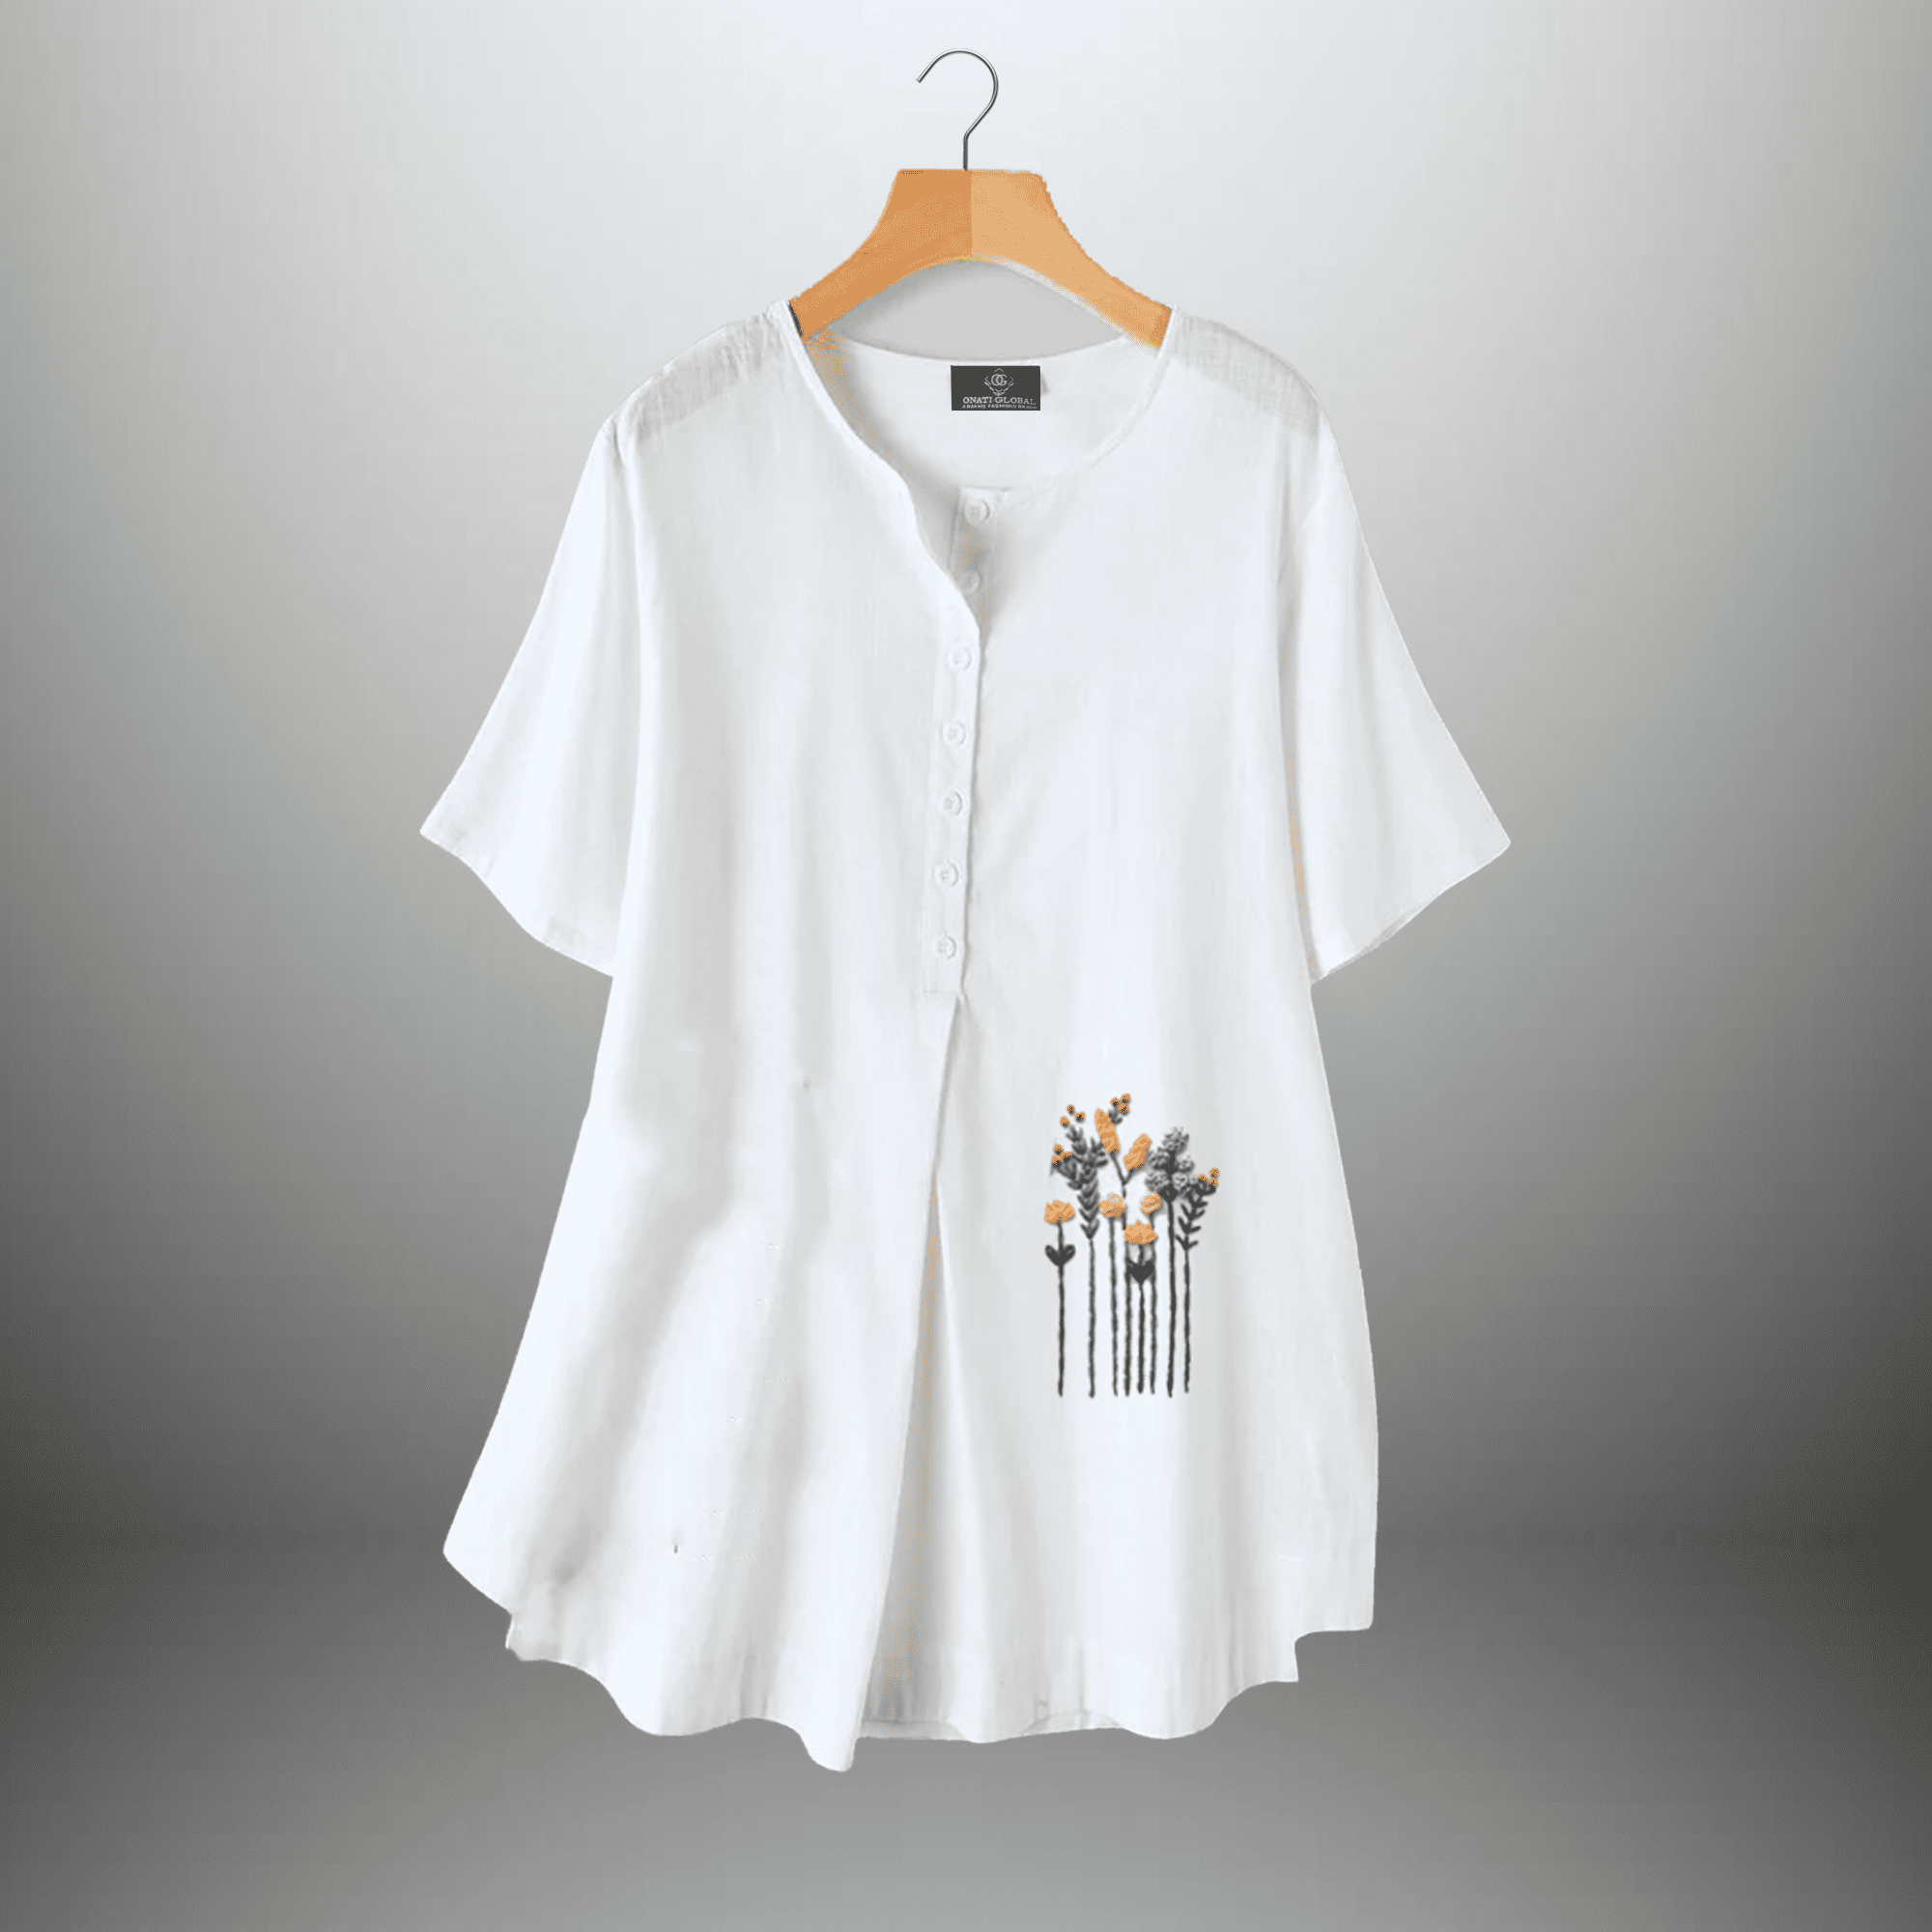 Solid White Top Cum Tunic with Floral Embroidery-RCT130